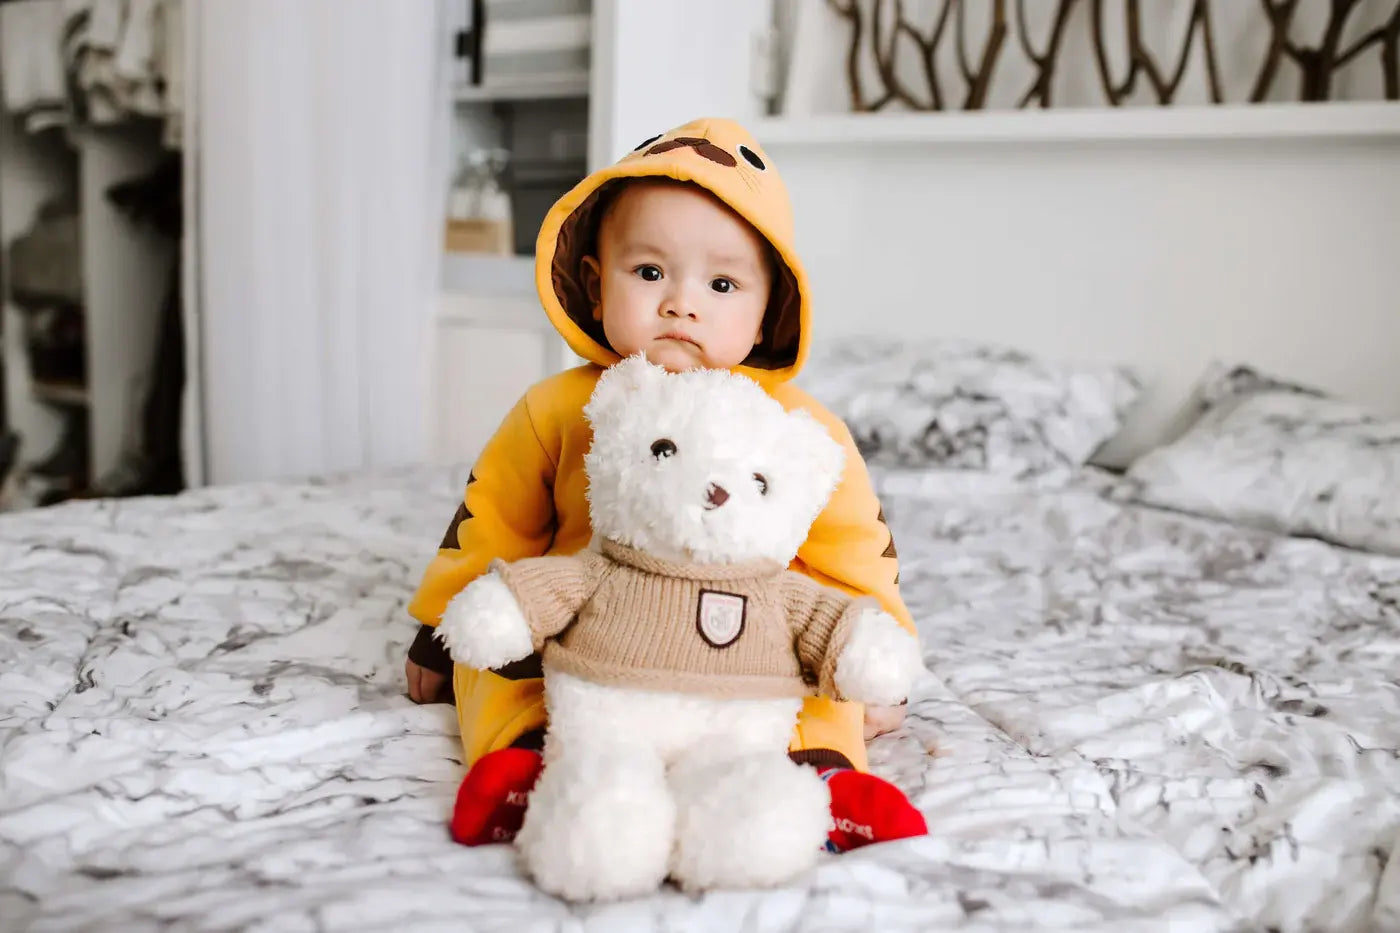 a fomo baby holding a bear toy